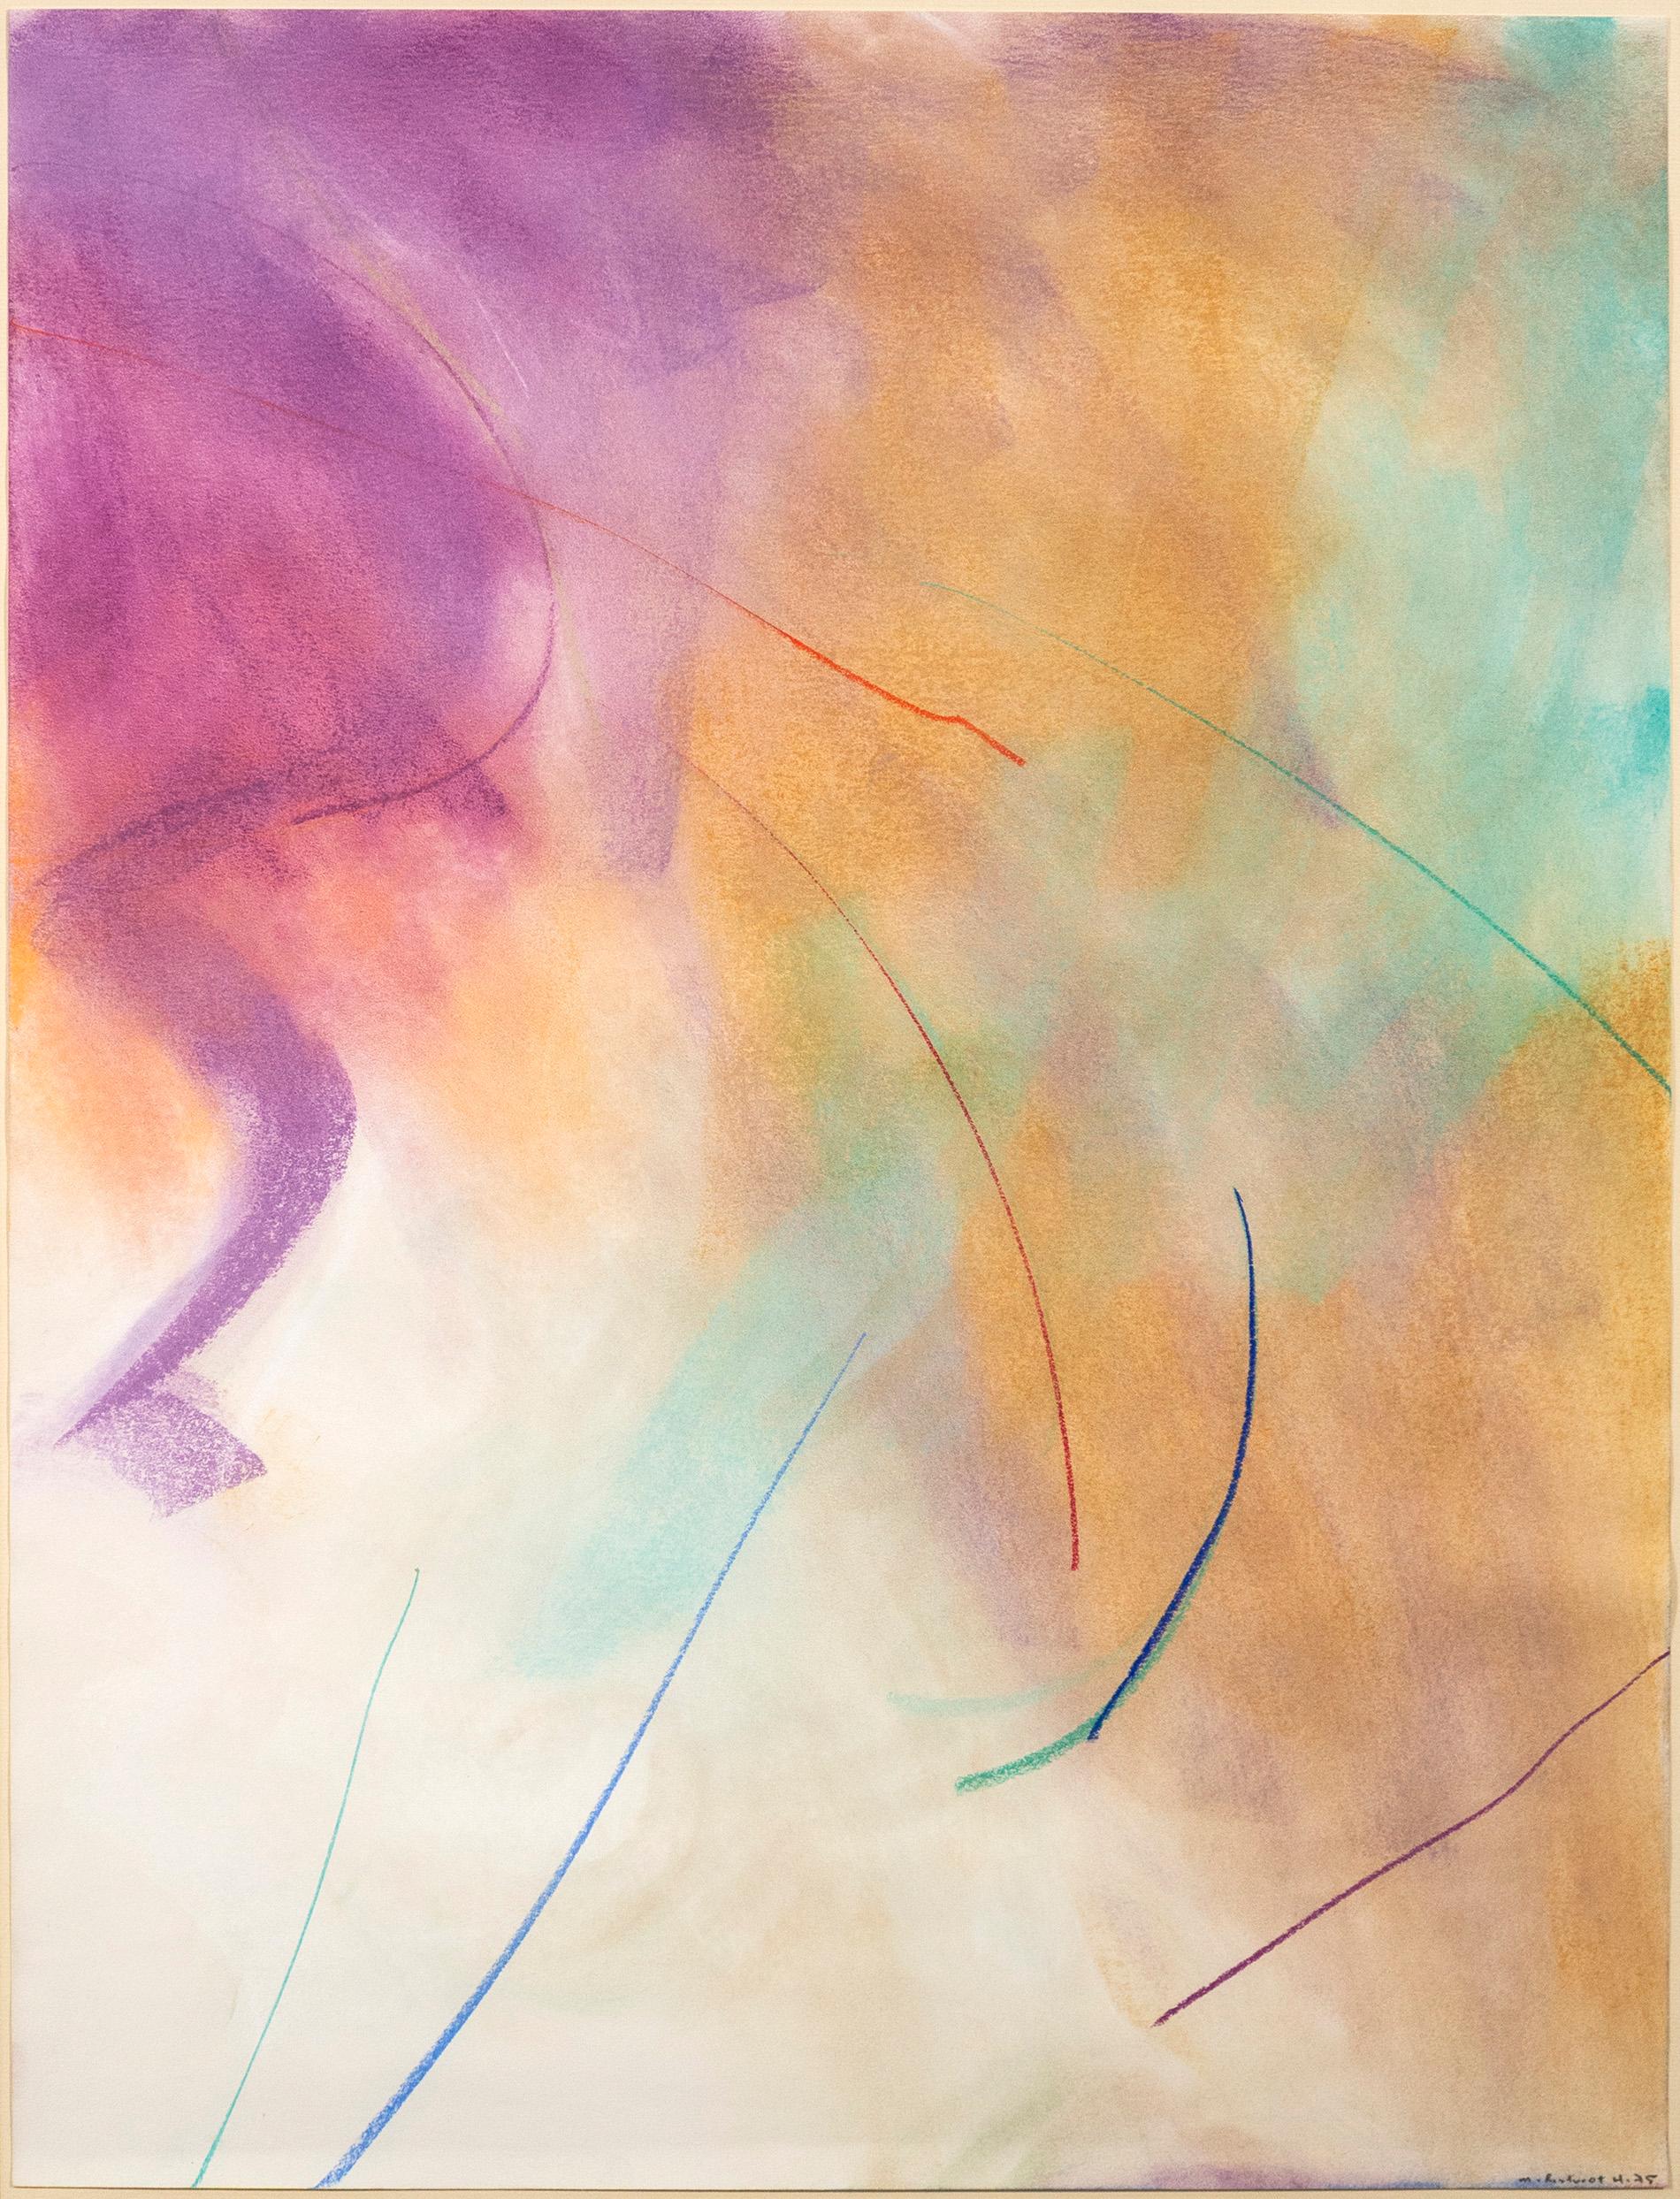 This ethereal abstract pastel on paper is an early work by Milly Ritsvedt known as one of Canada’s foremost abstract artists. Soft clouds of magenta, sienna and turquoise float across the canvas in this expressive work. Fine gestural lines in vivid